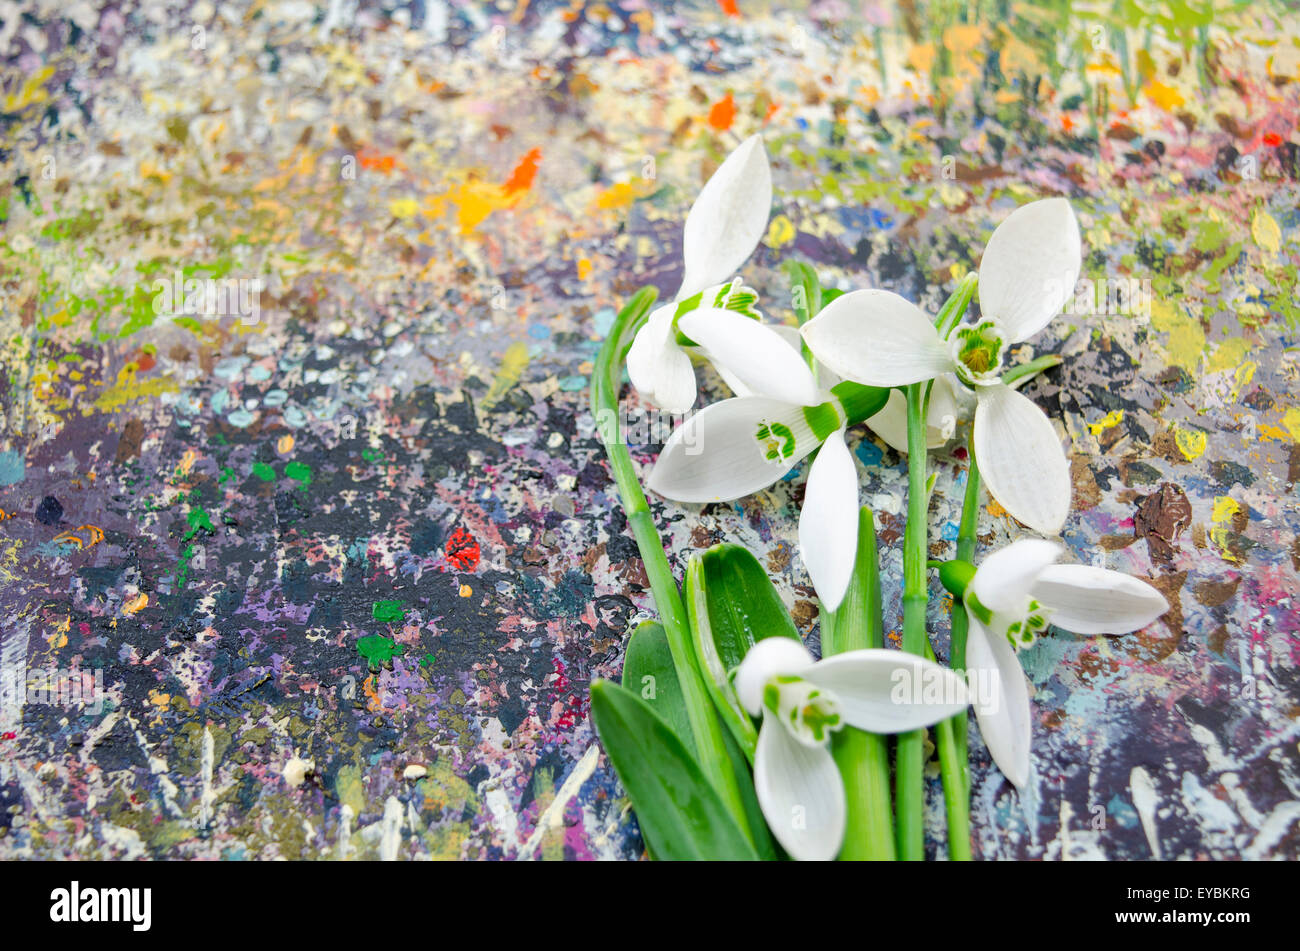 Snowdrop flowers  on a colorful patterned background Stock Photo